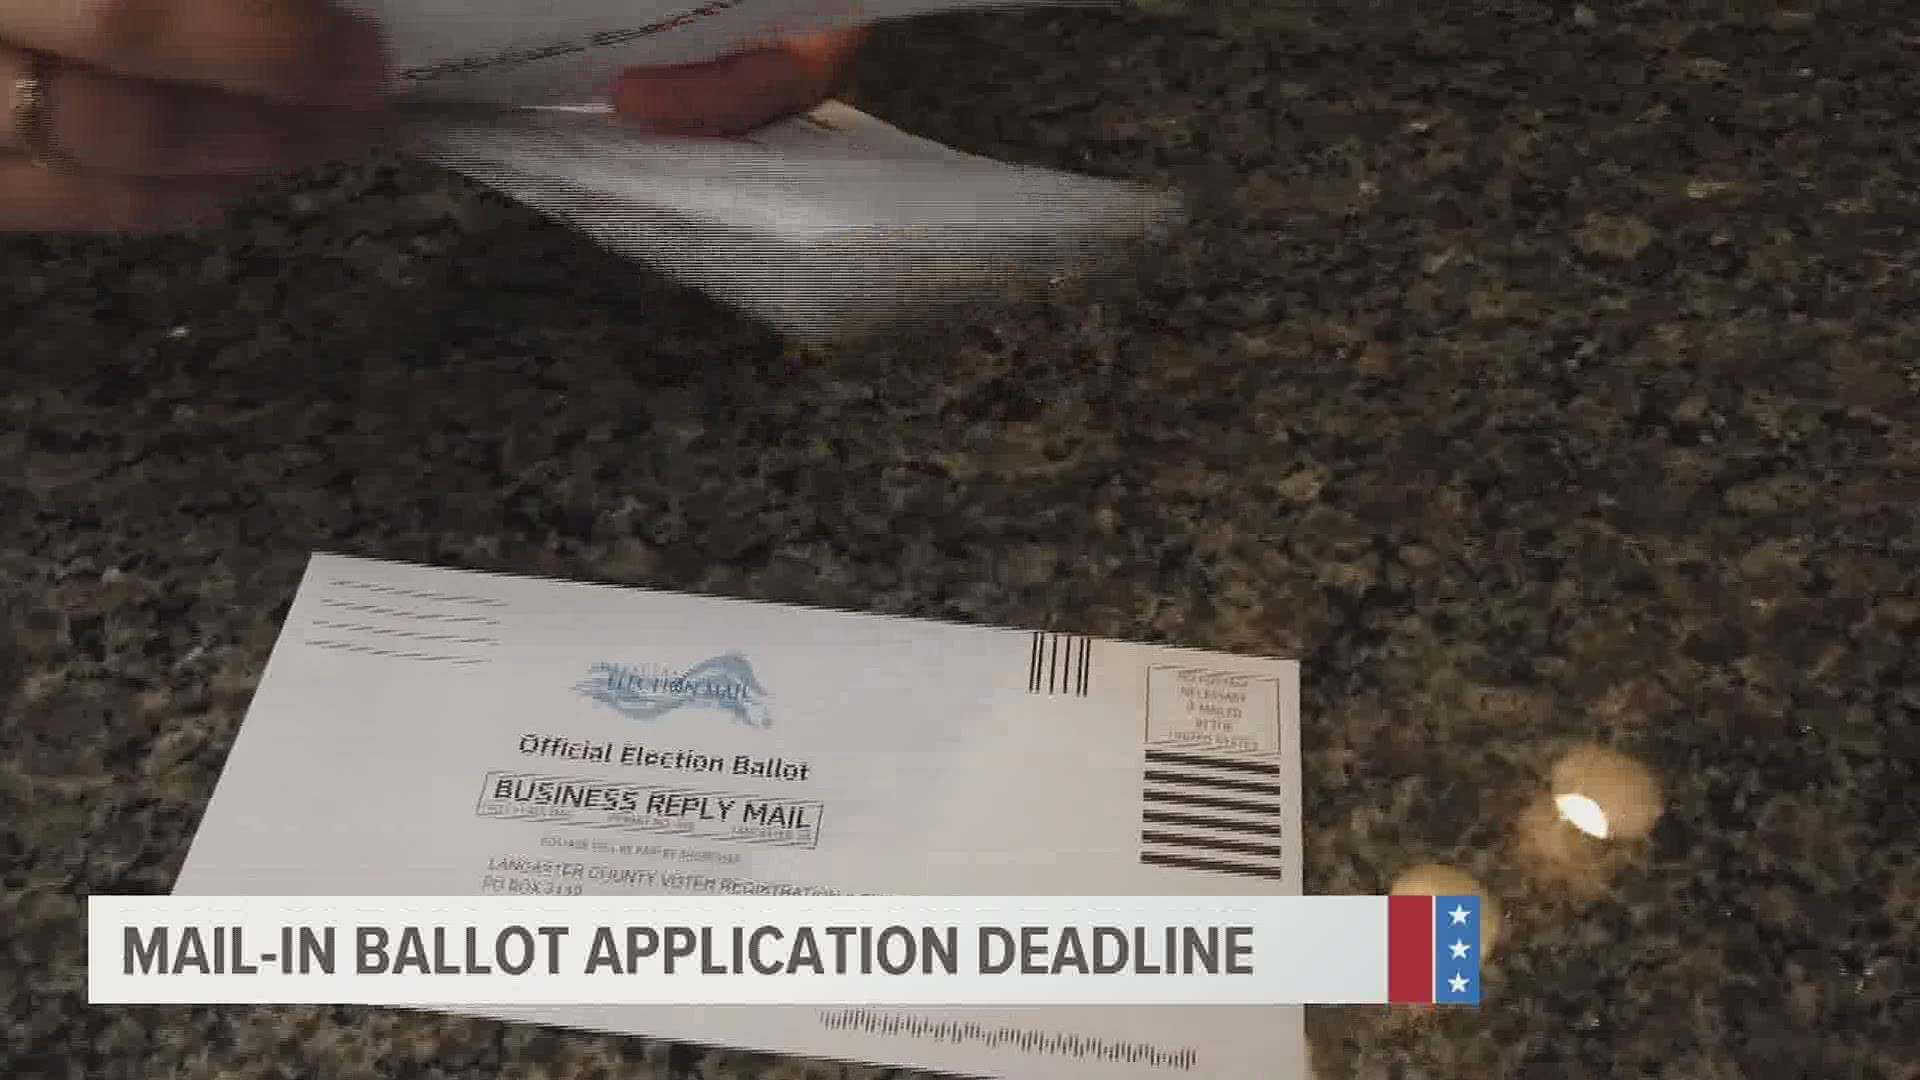 "As soon as they get their ballot, they need to hand deliver it back."